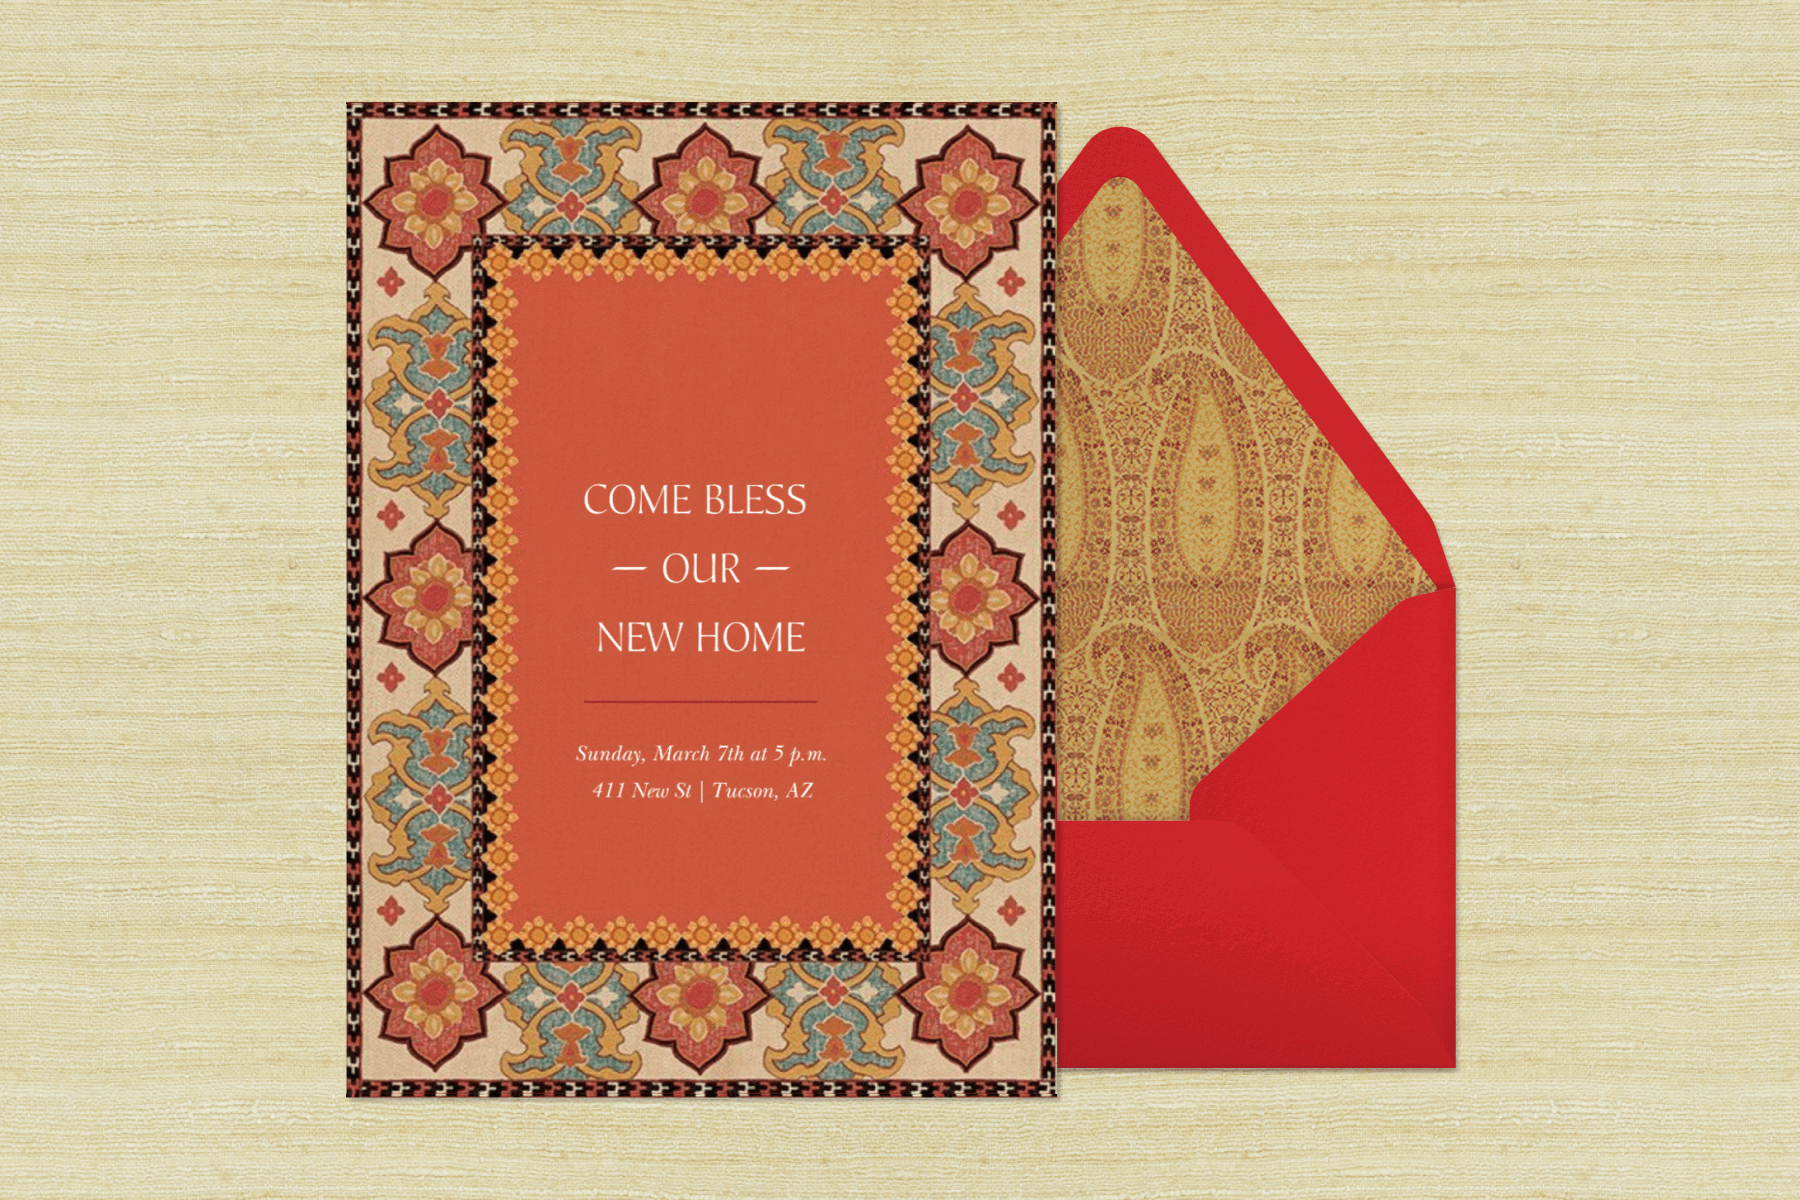 An invitation for a housewarming party reads “Come bless our new home” with a faded bohemian pattern around the border and muted orange in the middle beside a red envelope with a faded yellow paisley print liner.